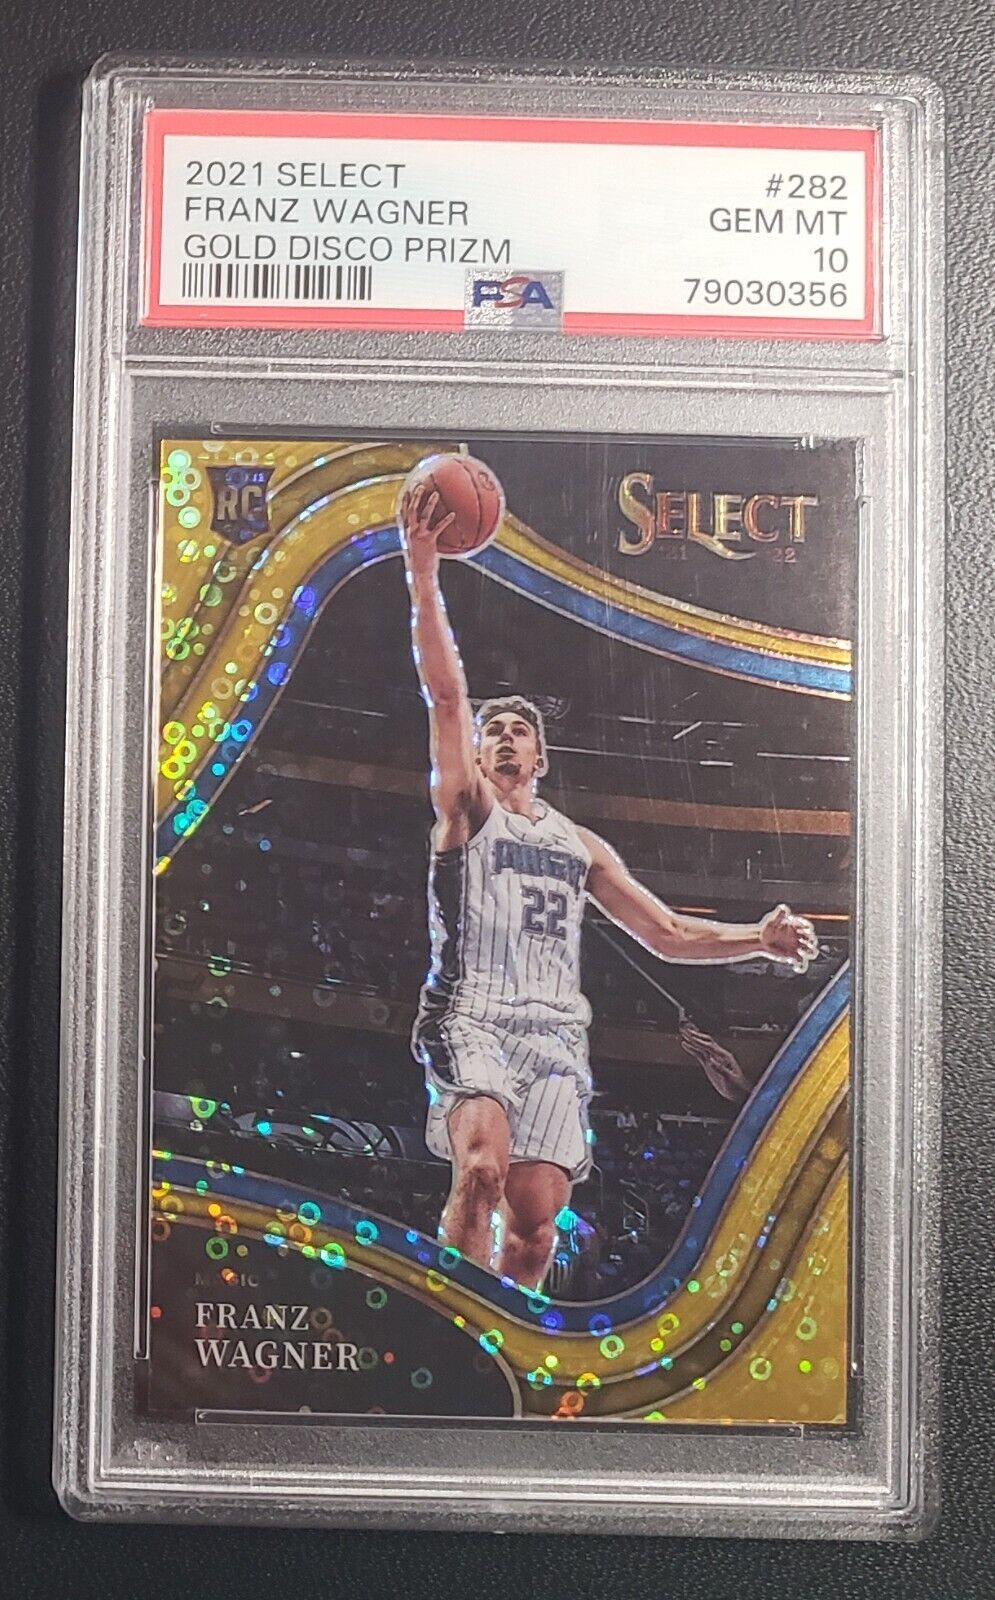 2021-22 Select * FRANZ WAGNER ROOKIE COURTSIDE GOLD DISCO PRIZM RC /10 * PSA 10